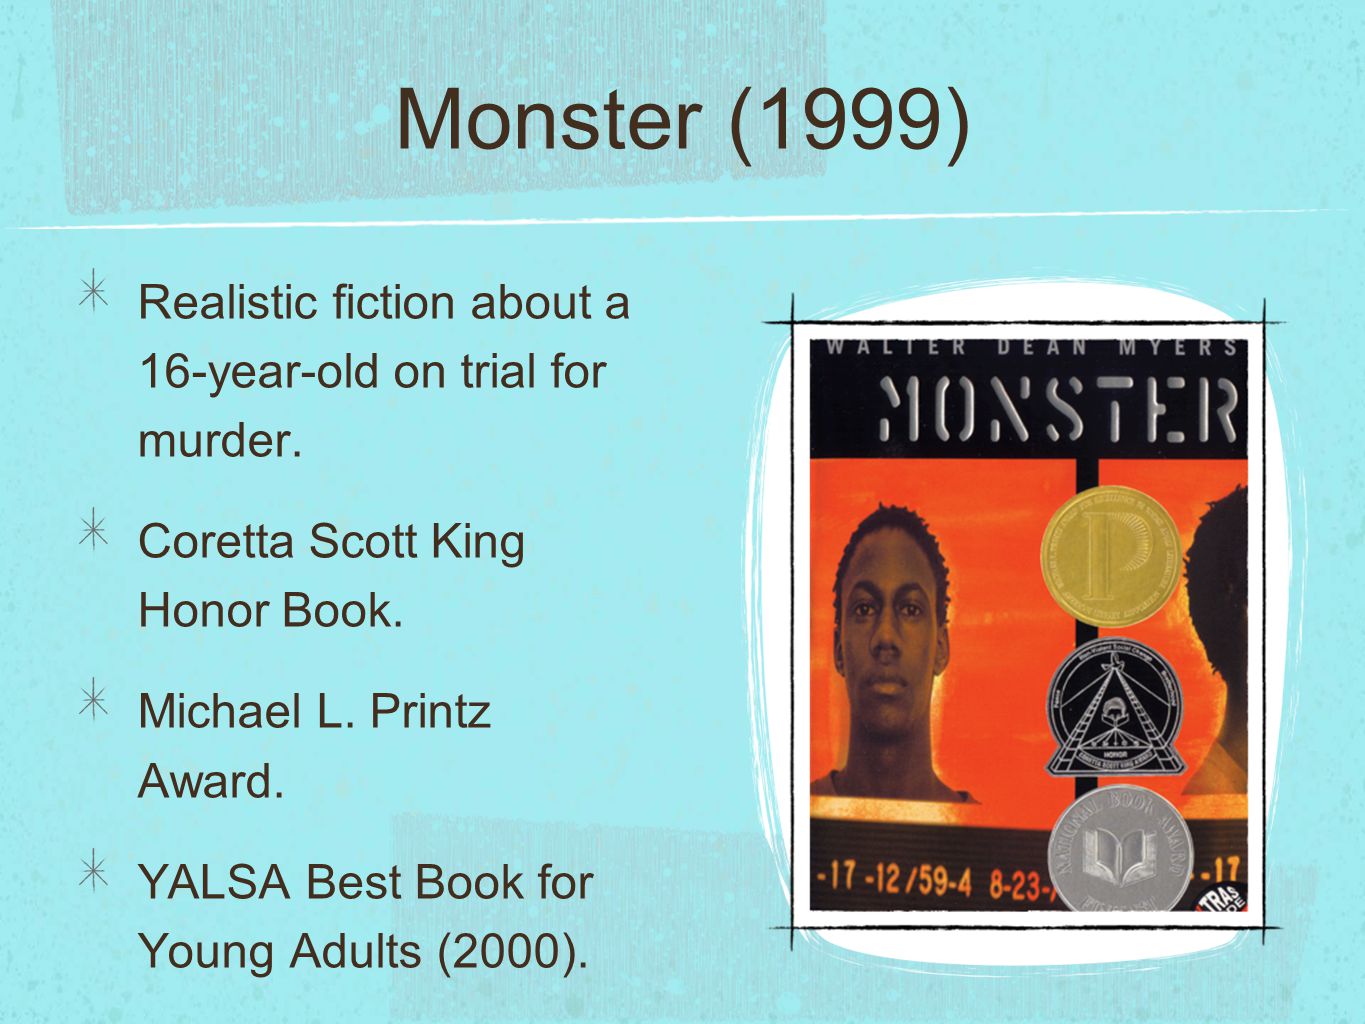 Monster (1999) Realistic fiction about a 16-year-old on trial for murder.